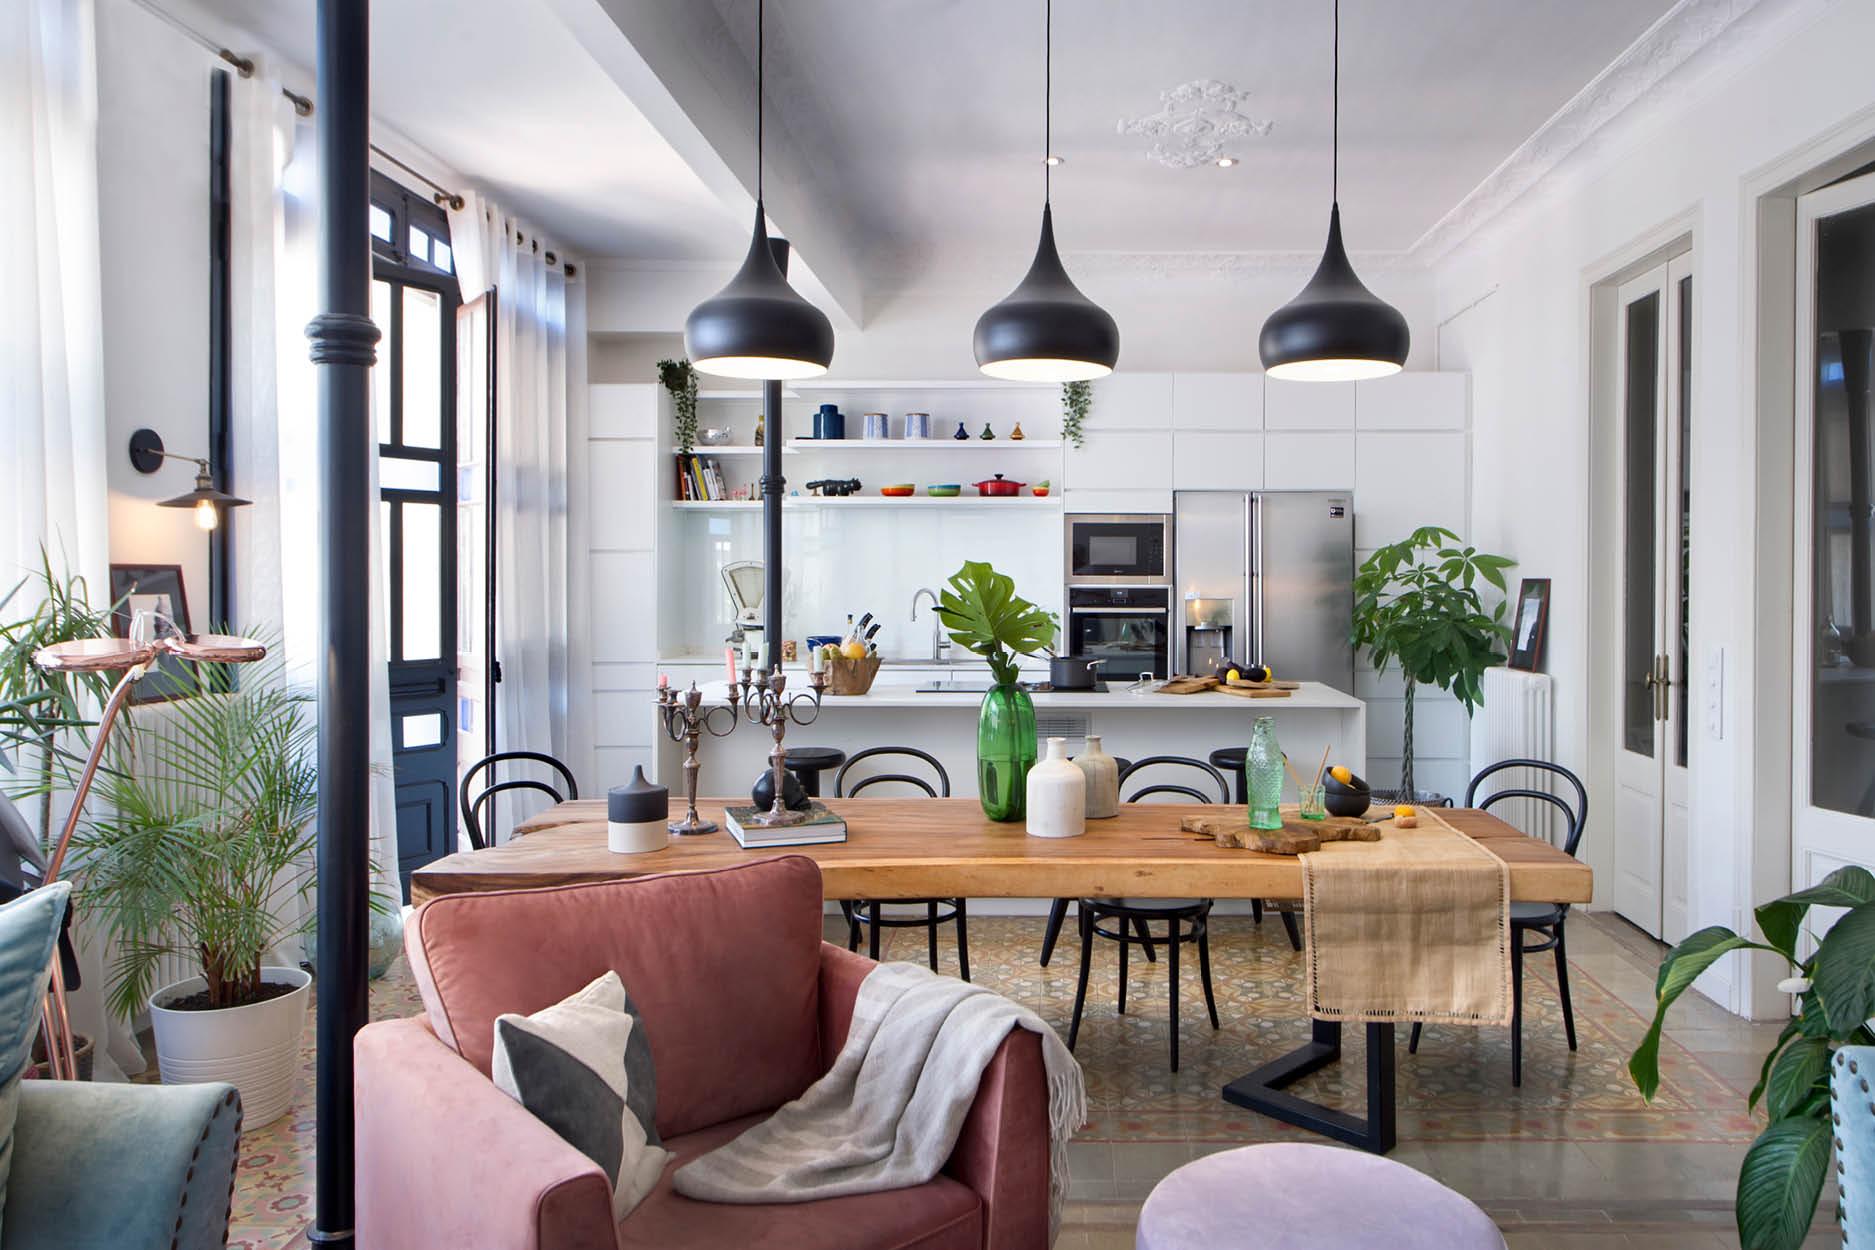 Multiple Design Styles Coexist in This Ecclectic, Barcelona Apartment